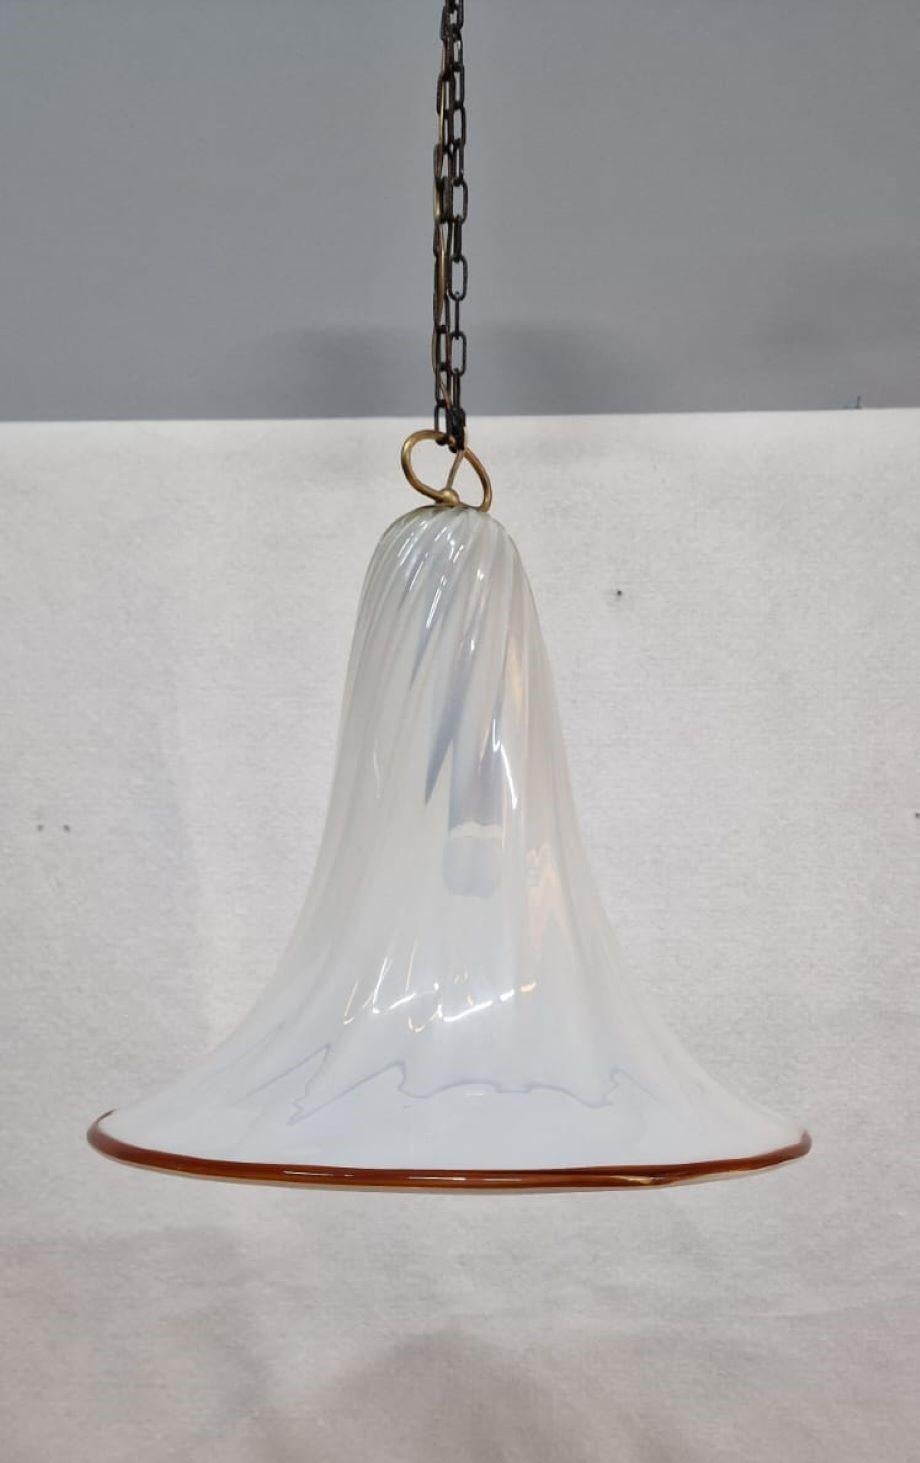 Large Murano glass chandelier in the shape of a bell. The chandelier is semi-transparent white with a colored bottom edge. The chandelier is made entirely of glass with a metal hook. 1960s approx.